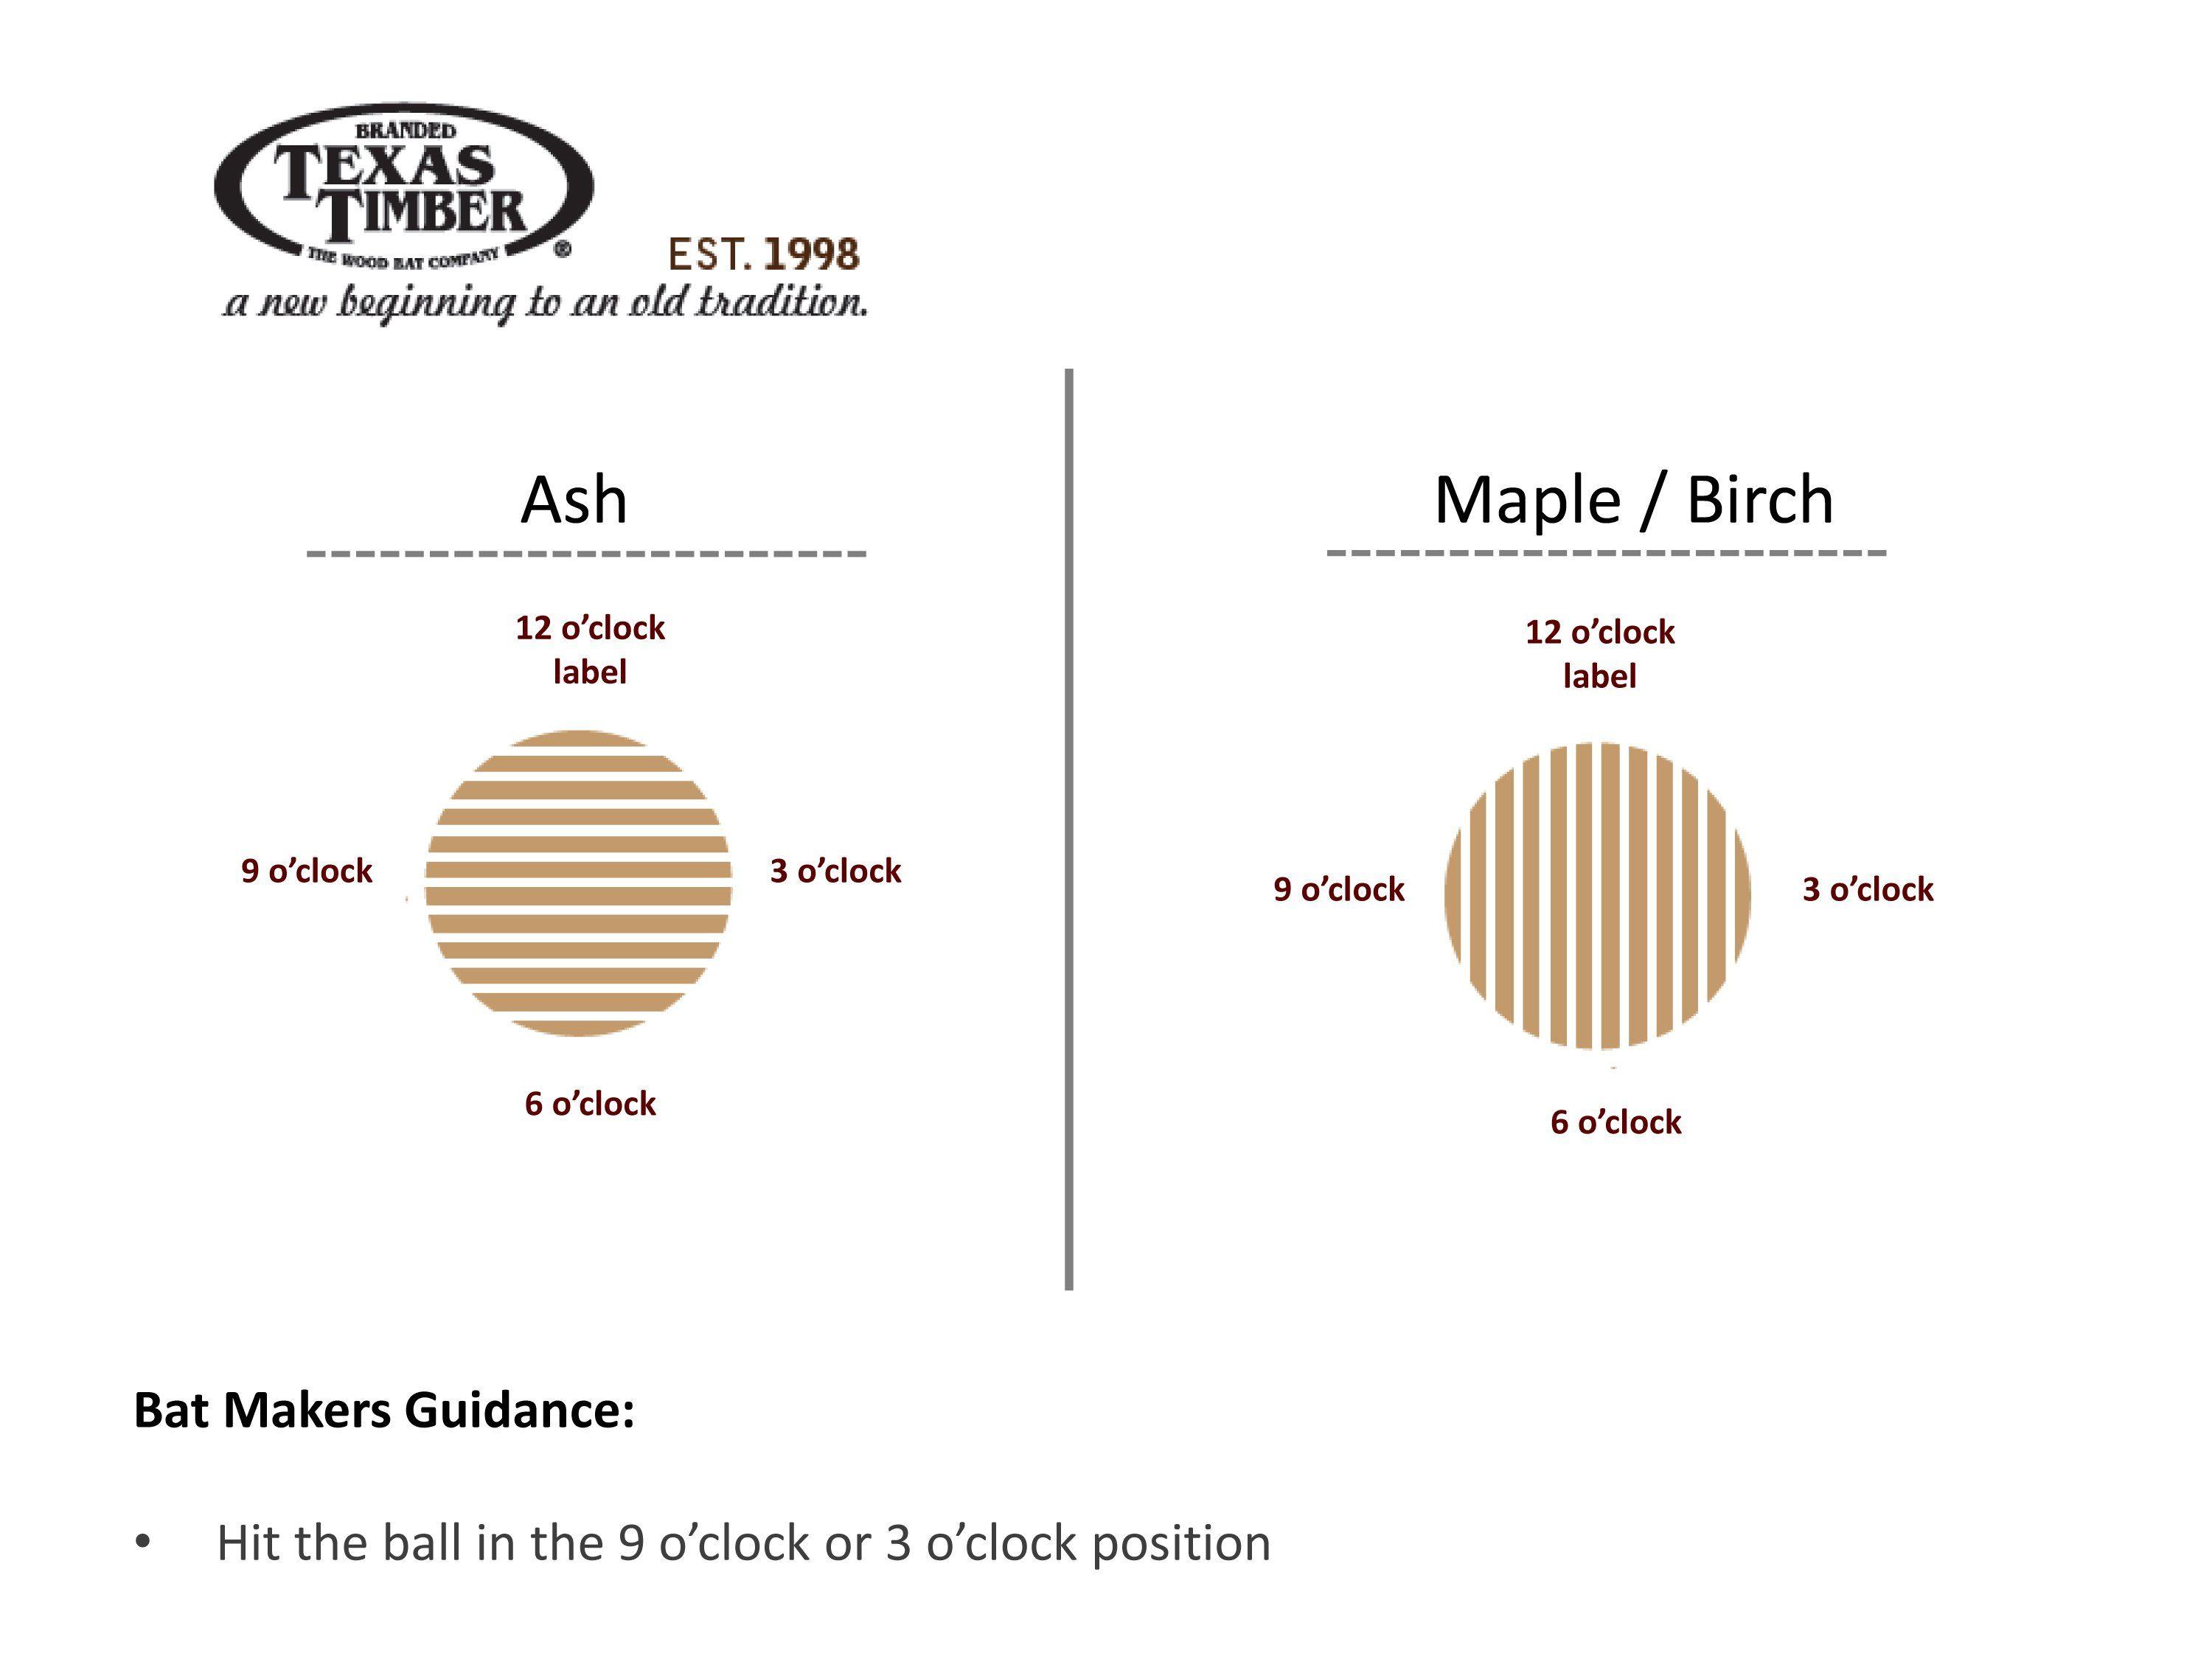 Bat Face Logo - Wood Bat (birch)-Ink Dot up or down, or label up or down : Homeplate